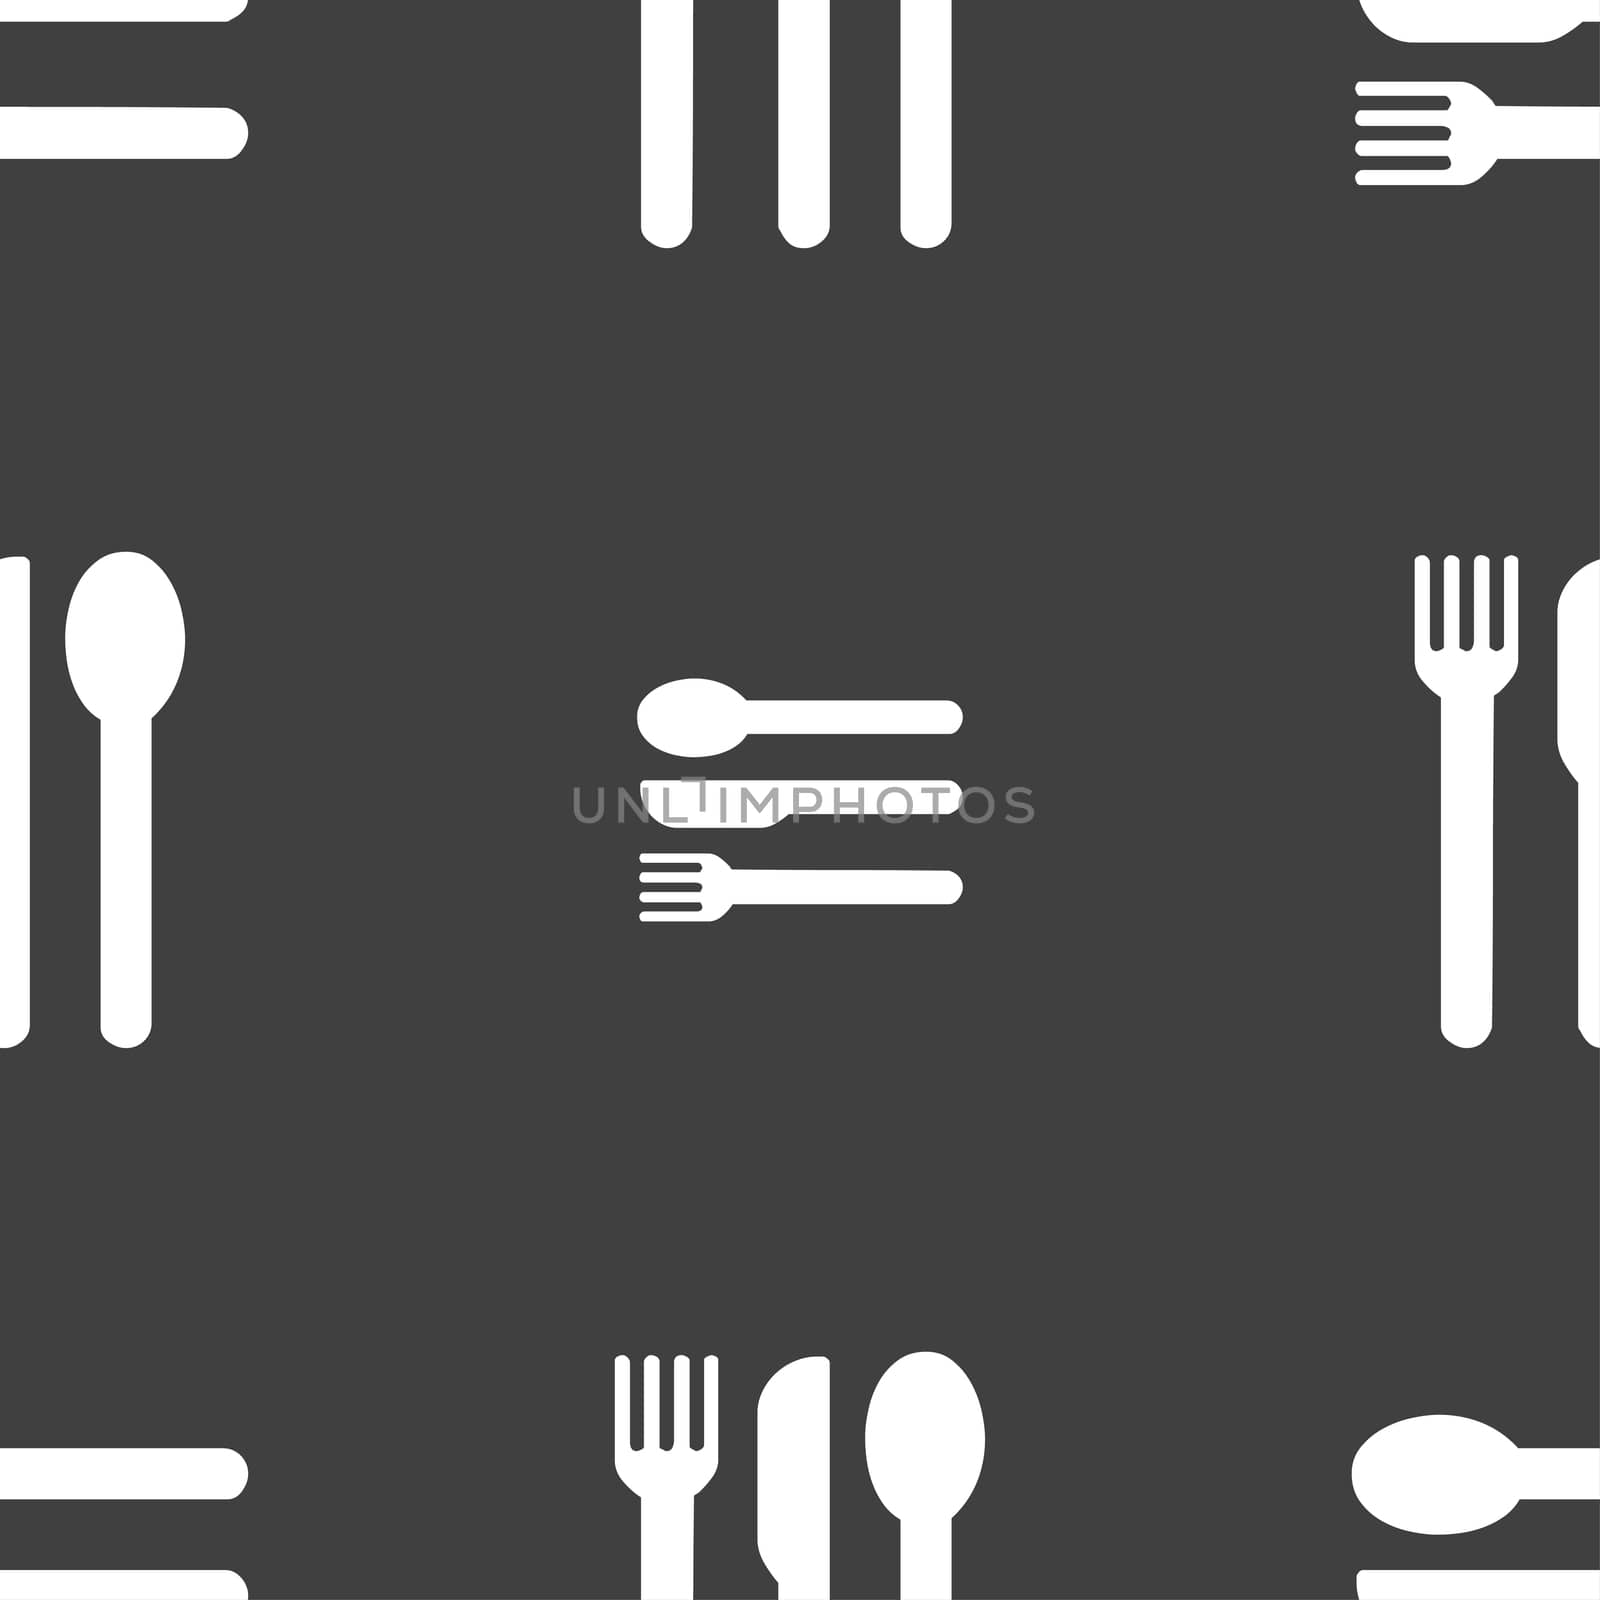 fork, knife, spoon icon sign. Seamless pattern on a gray background. illustration